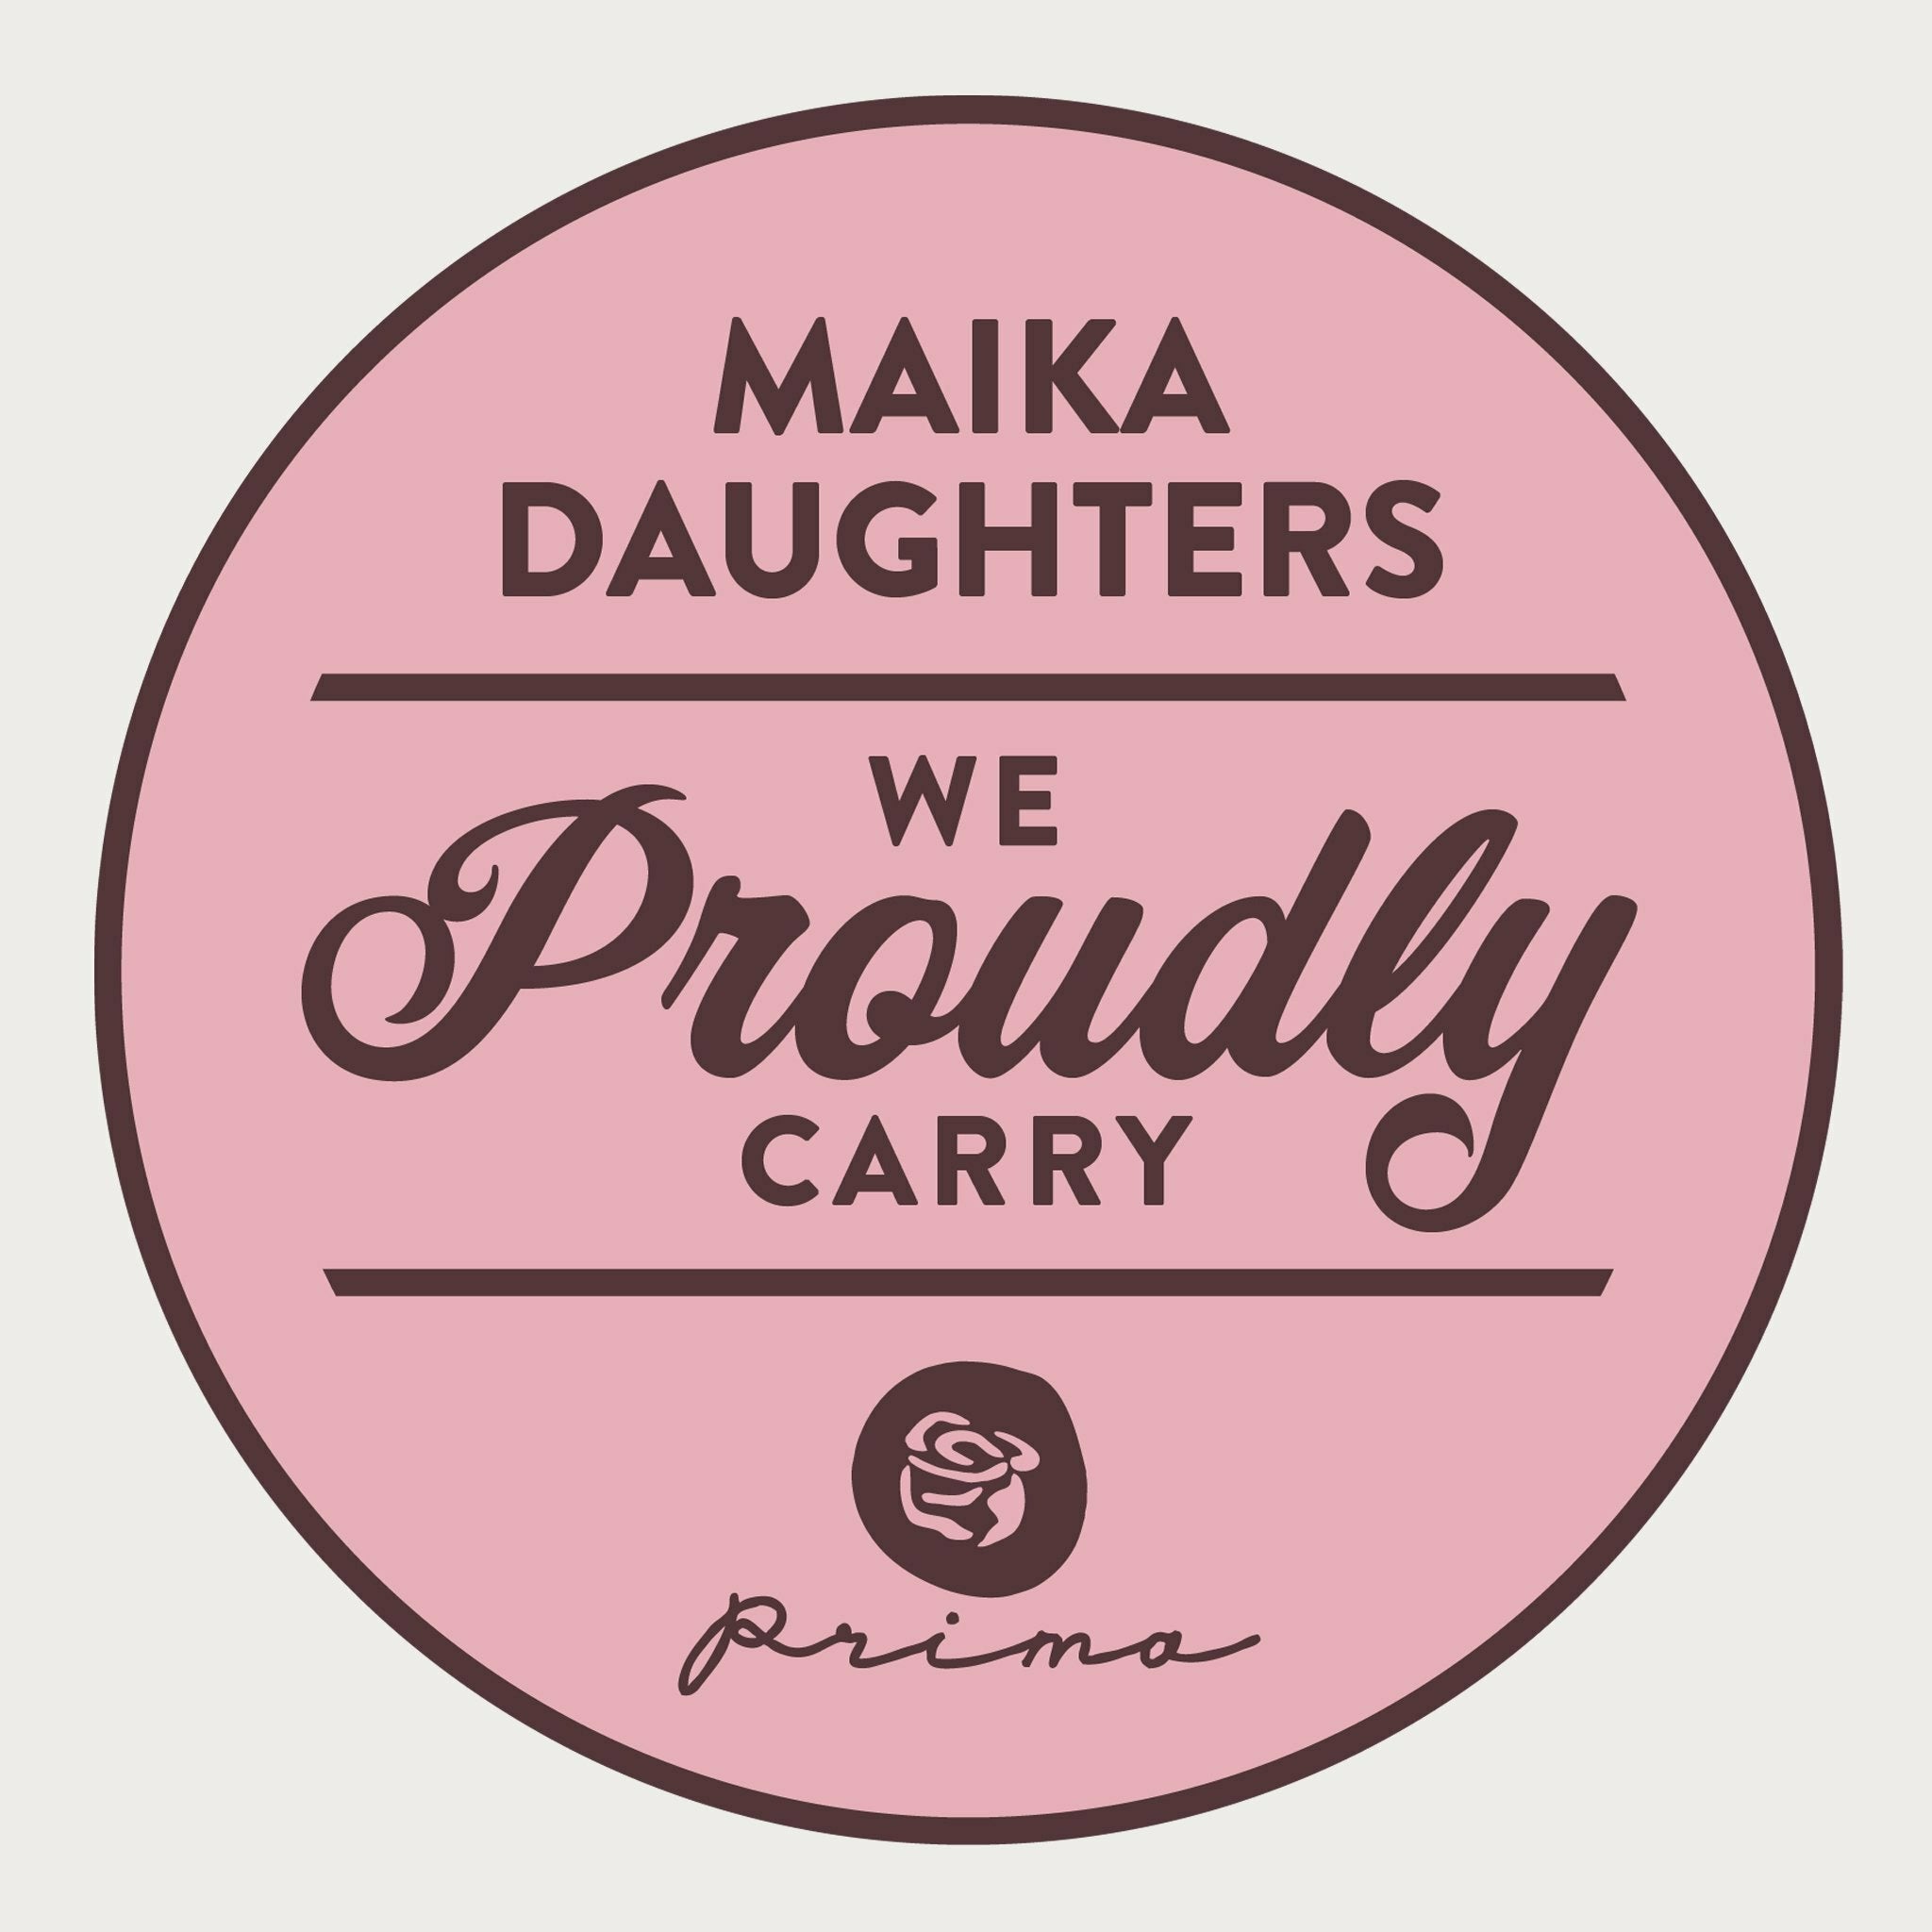 A white background with a pink circle, brown outline, and brown text that reads: Maika Daughters. We proudly carry Prima (using the Prima rose logo).